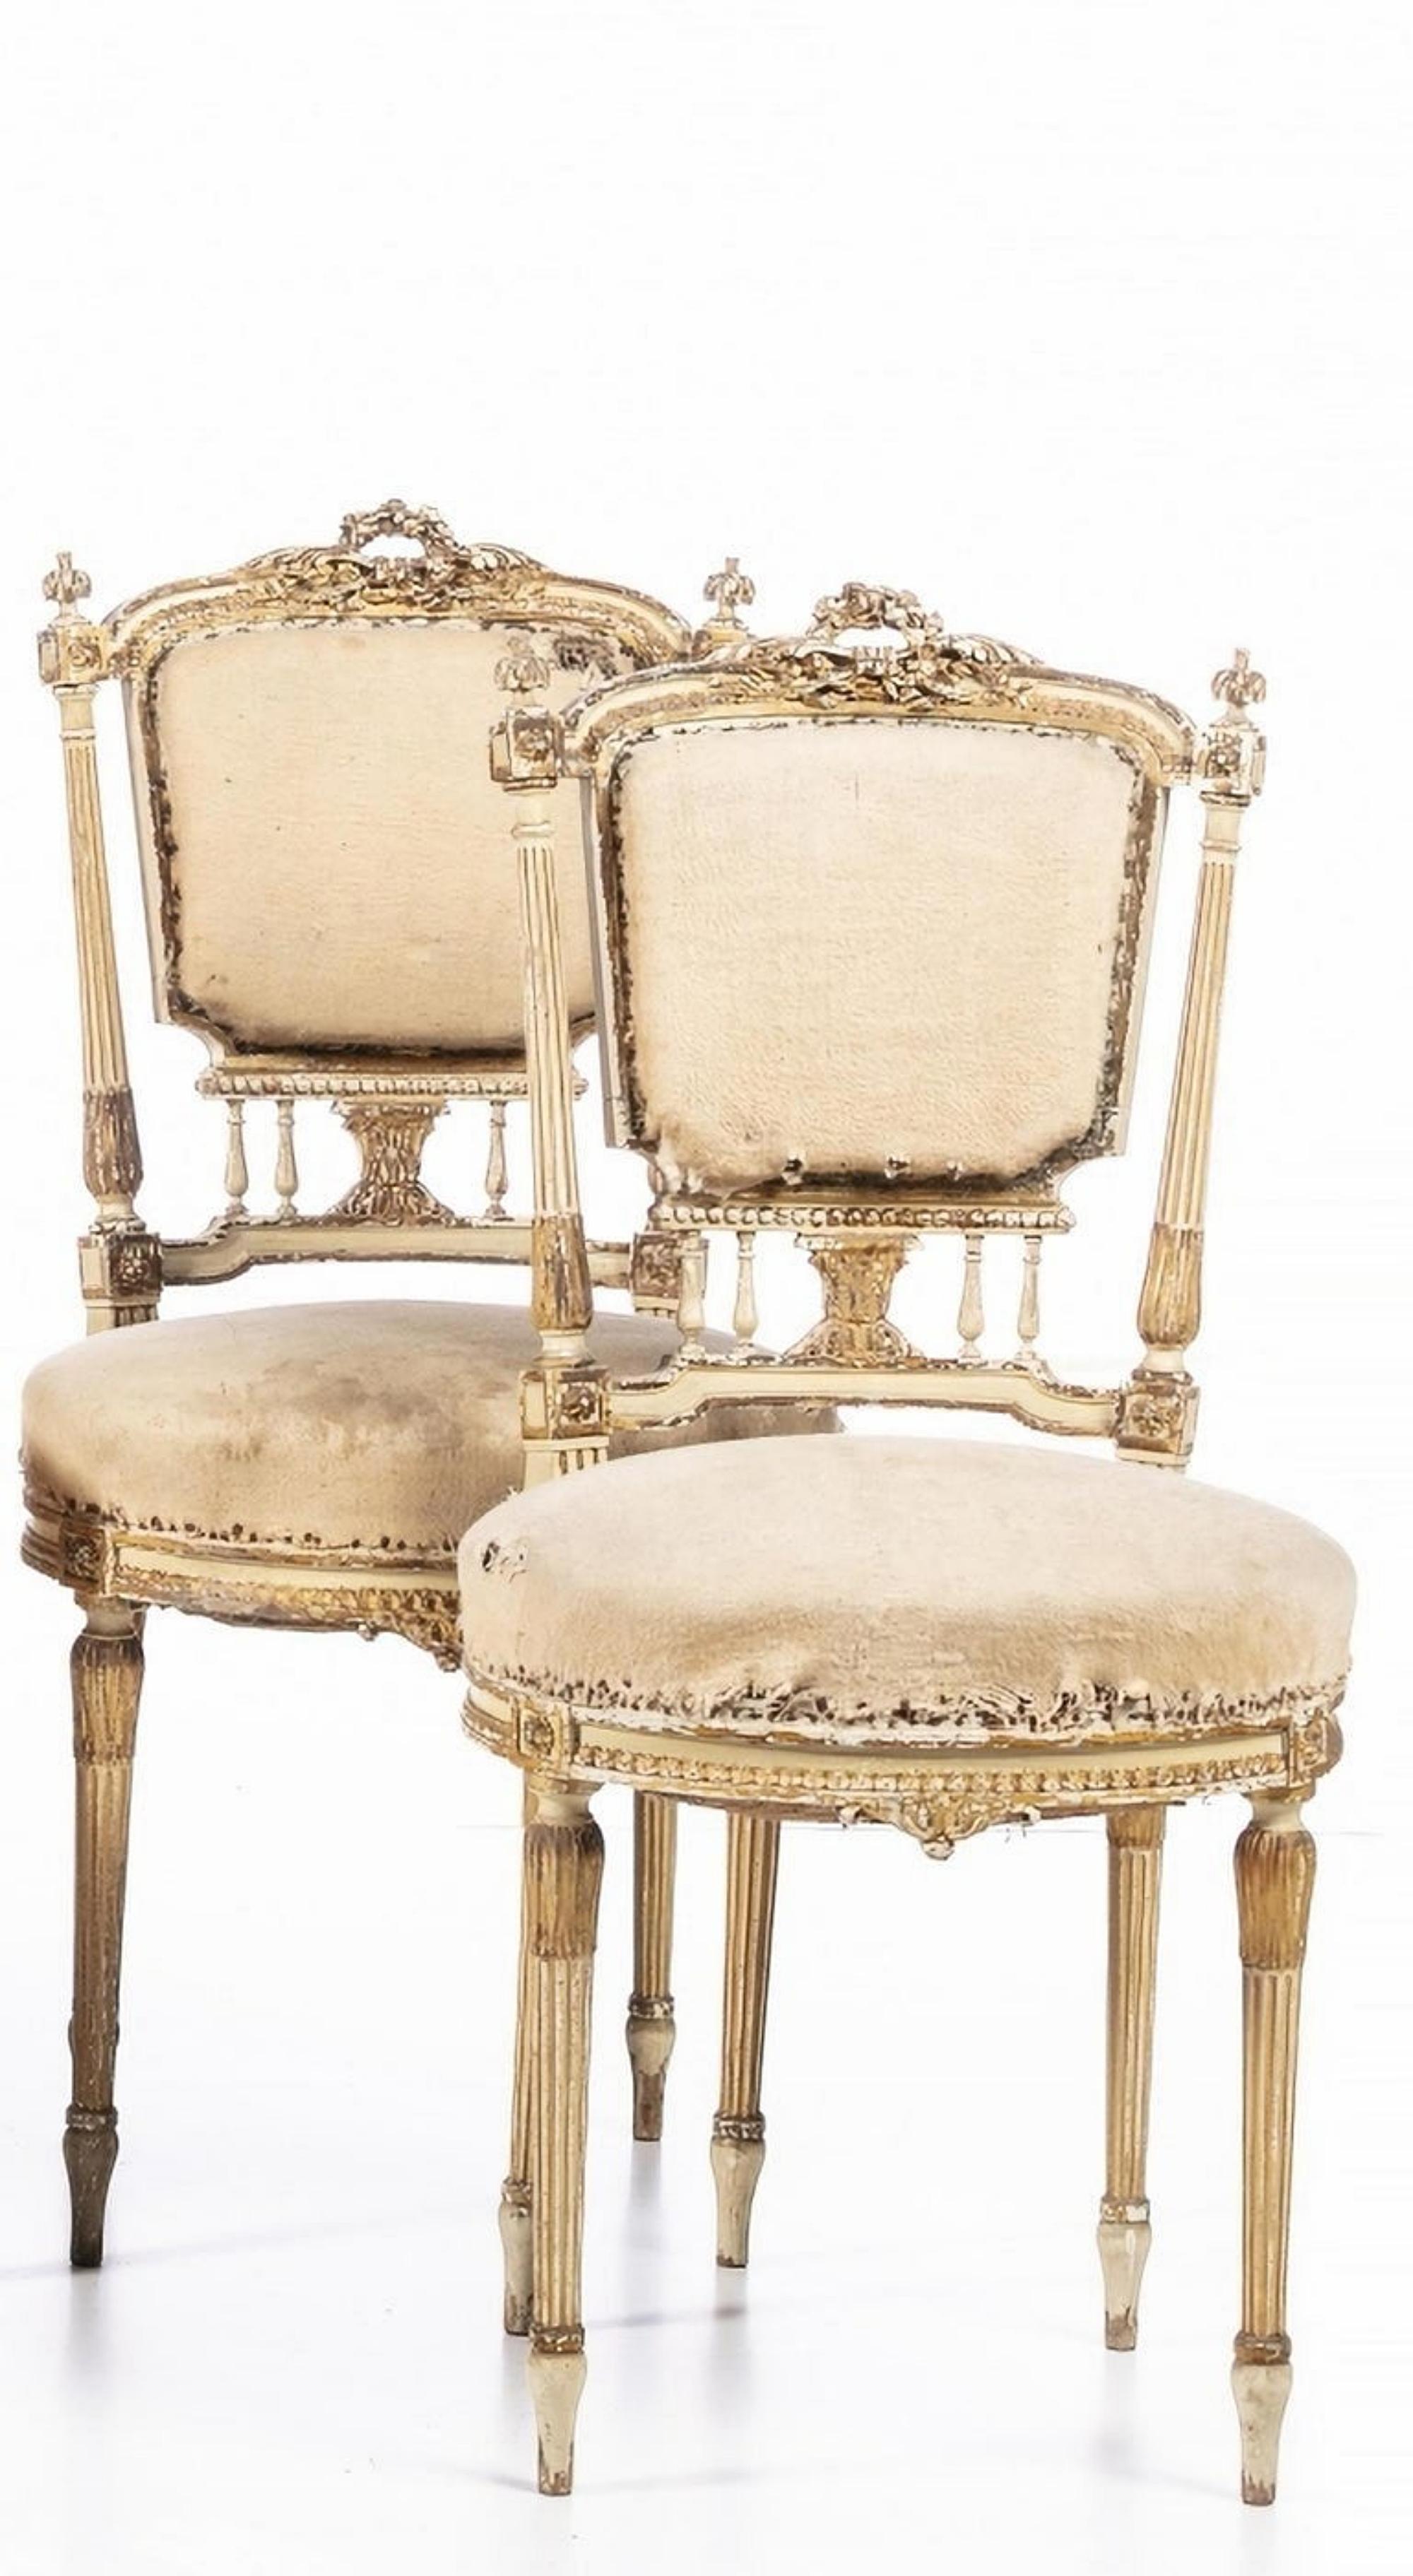 Set 5 French Chairs
Louis XV Style
19th Century
In painted and gilded carved wood. Upholstered seats and back.
Faults and defects.
Never restored
Dimensions: (larger) 96 x 52 x 42 cm.